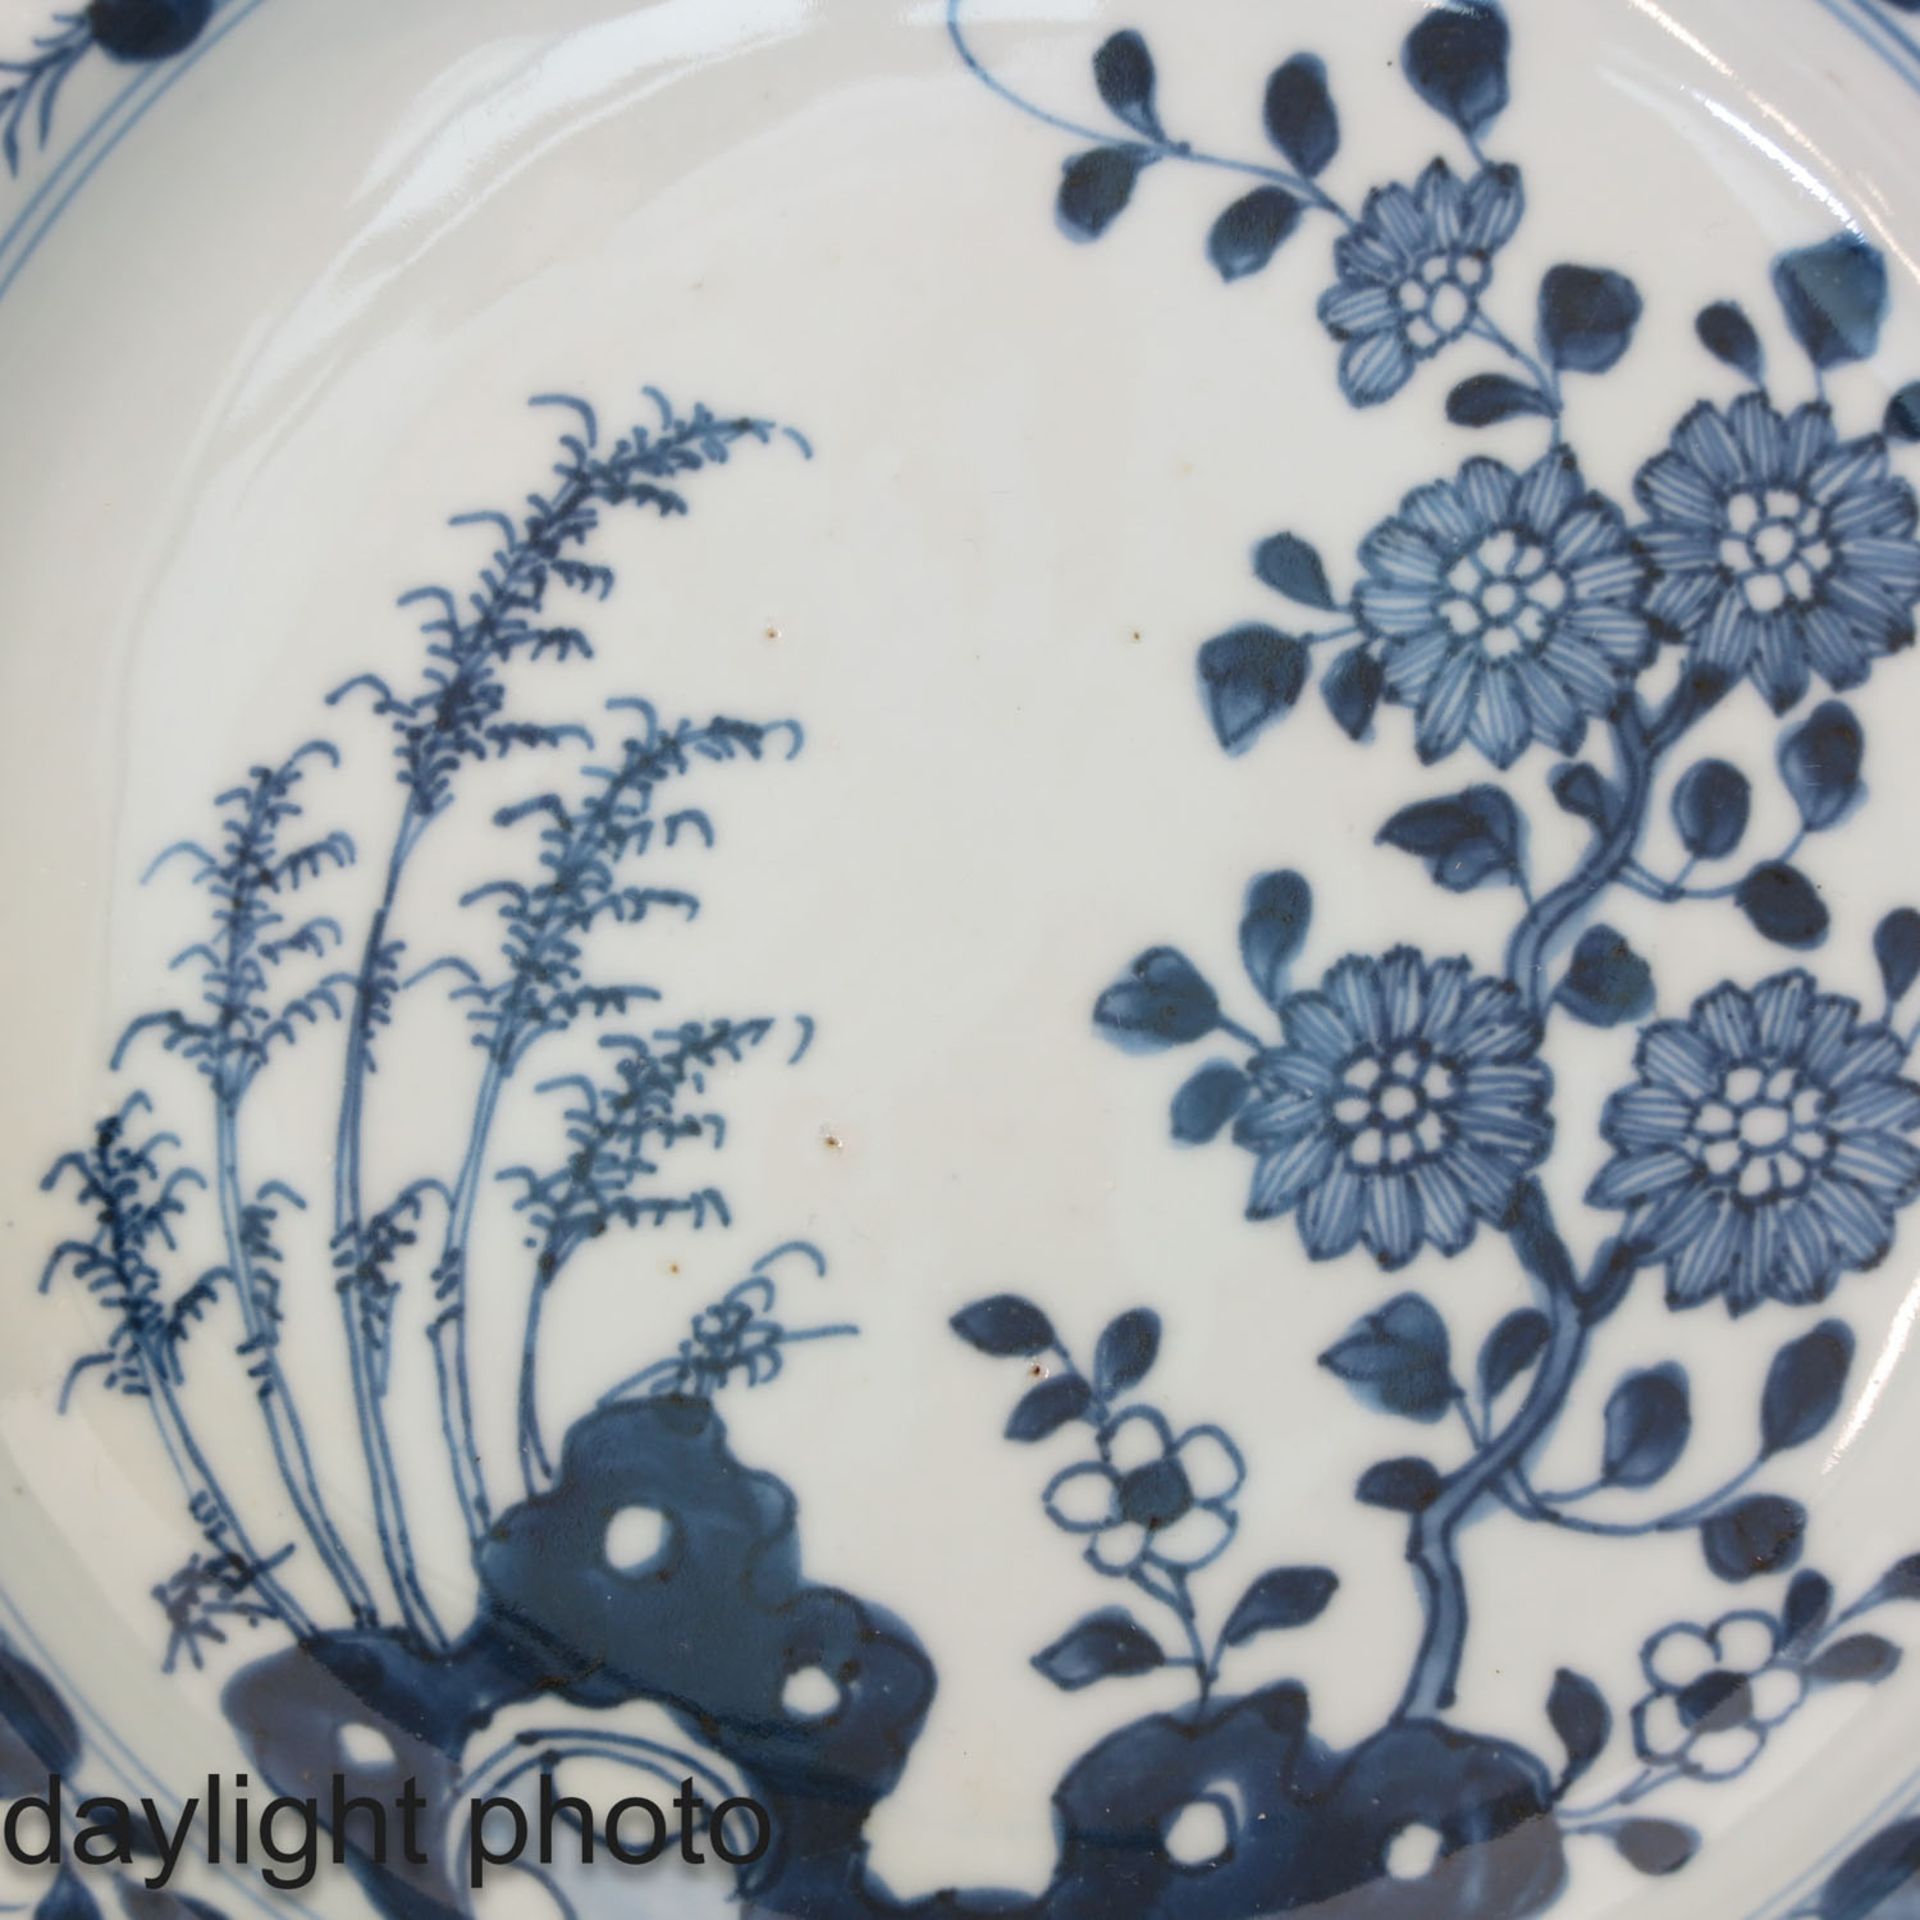 A Series of 4 Blue and White Plates - Image 9 of 9